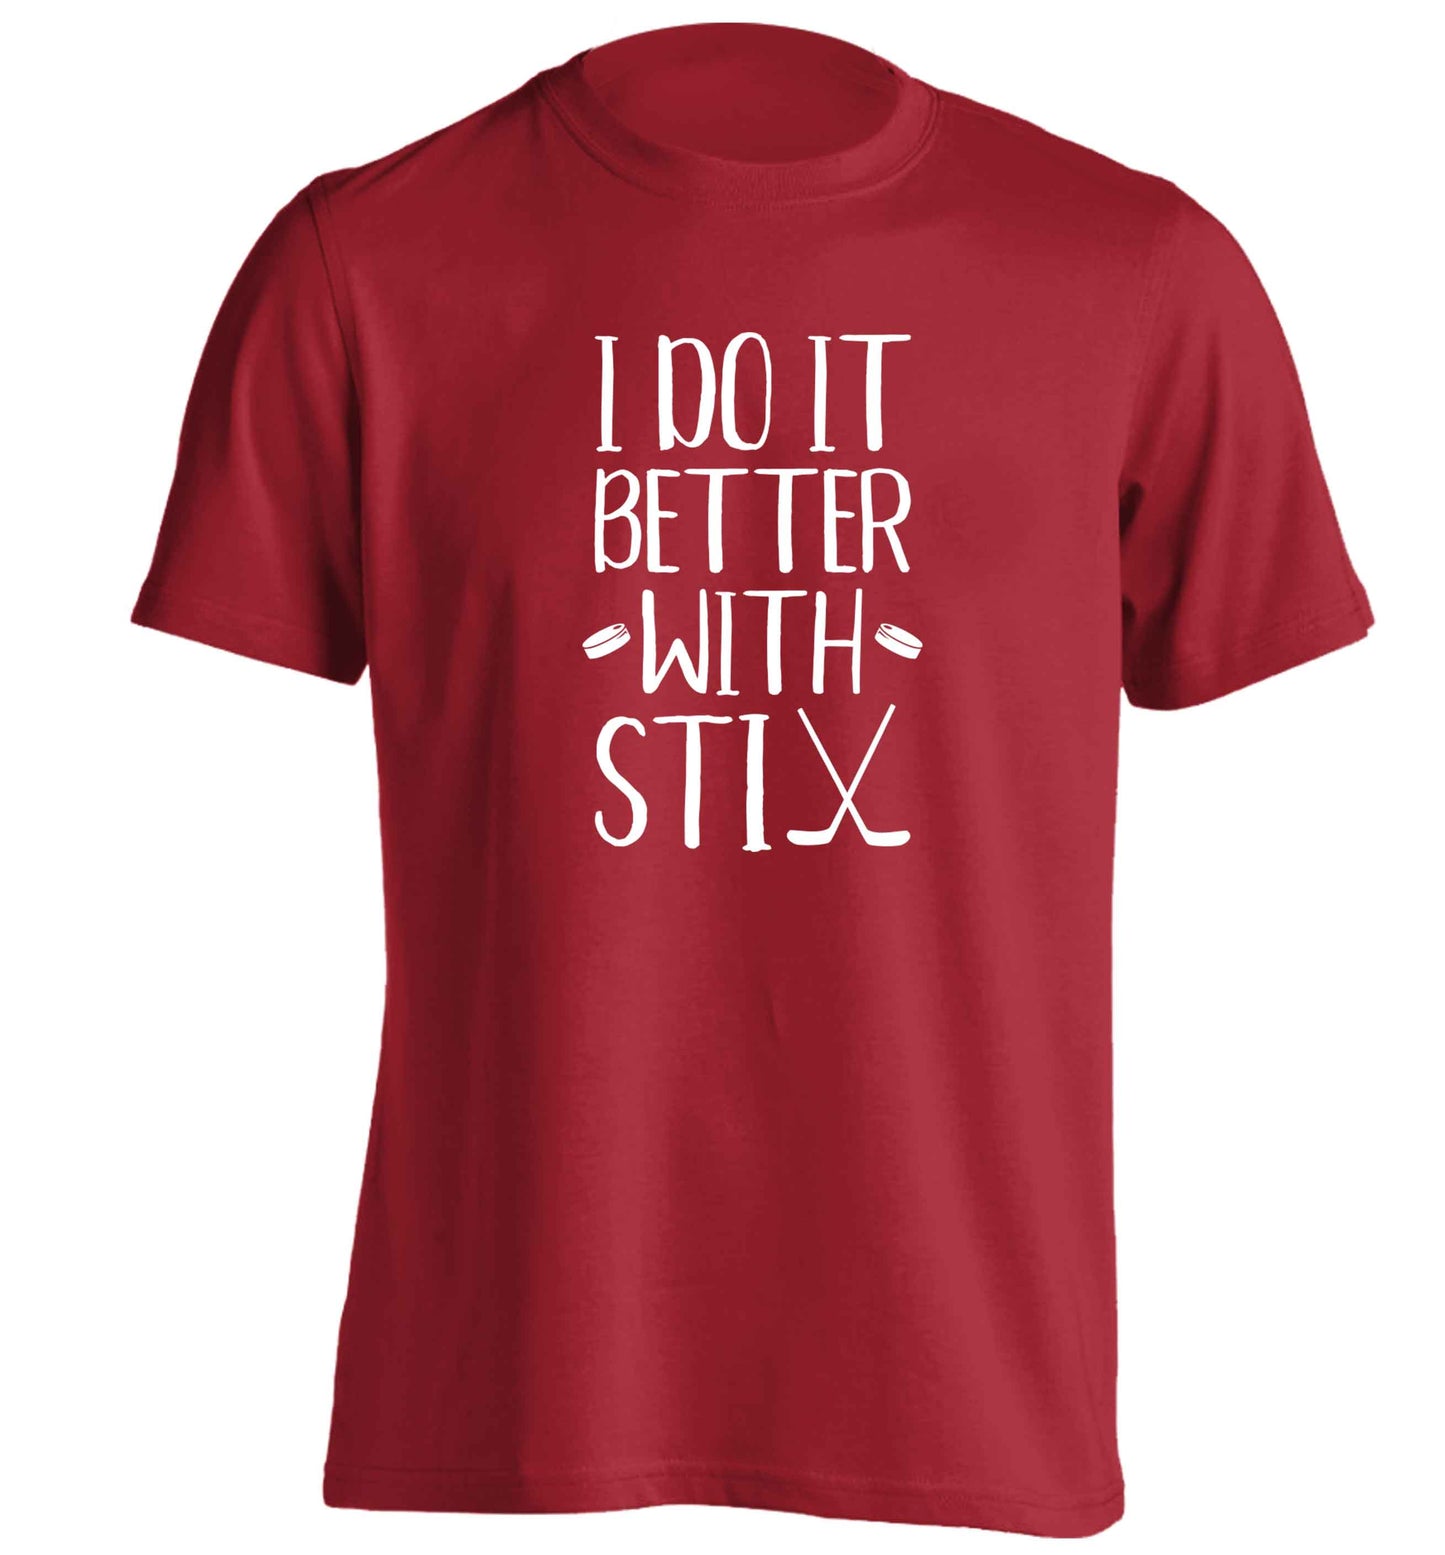 I do it better with stix (hockey) adults unisex red Tshirt 2XL